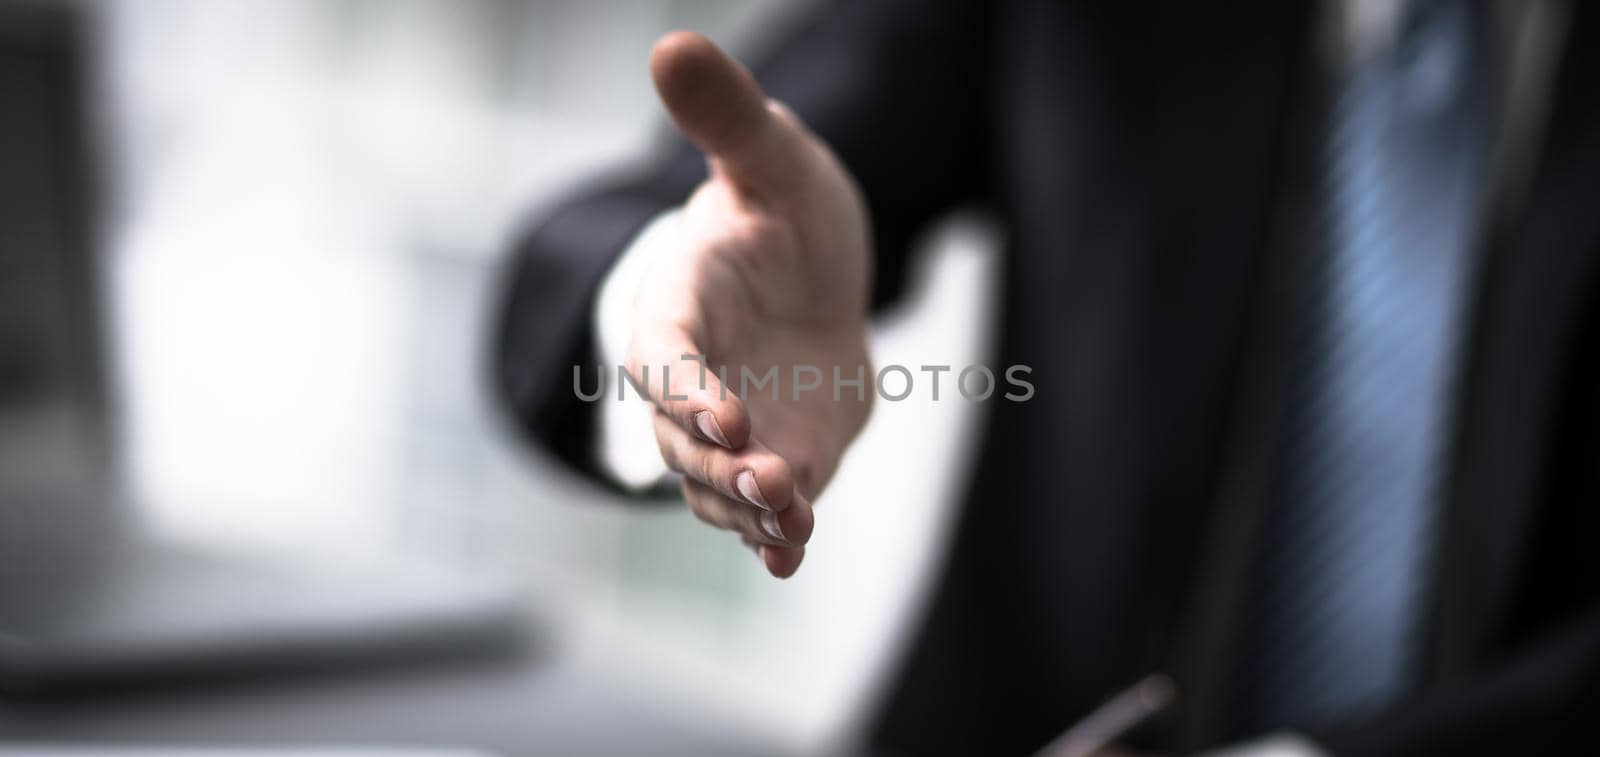 Portrait of a successful businessman giving a hand